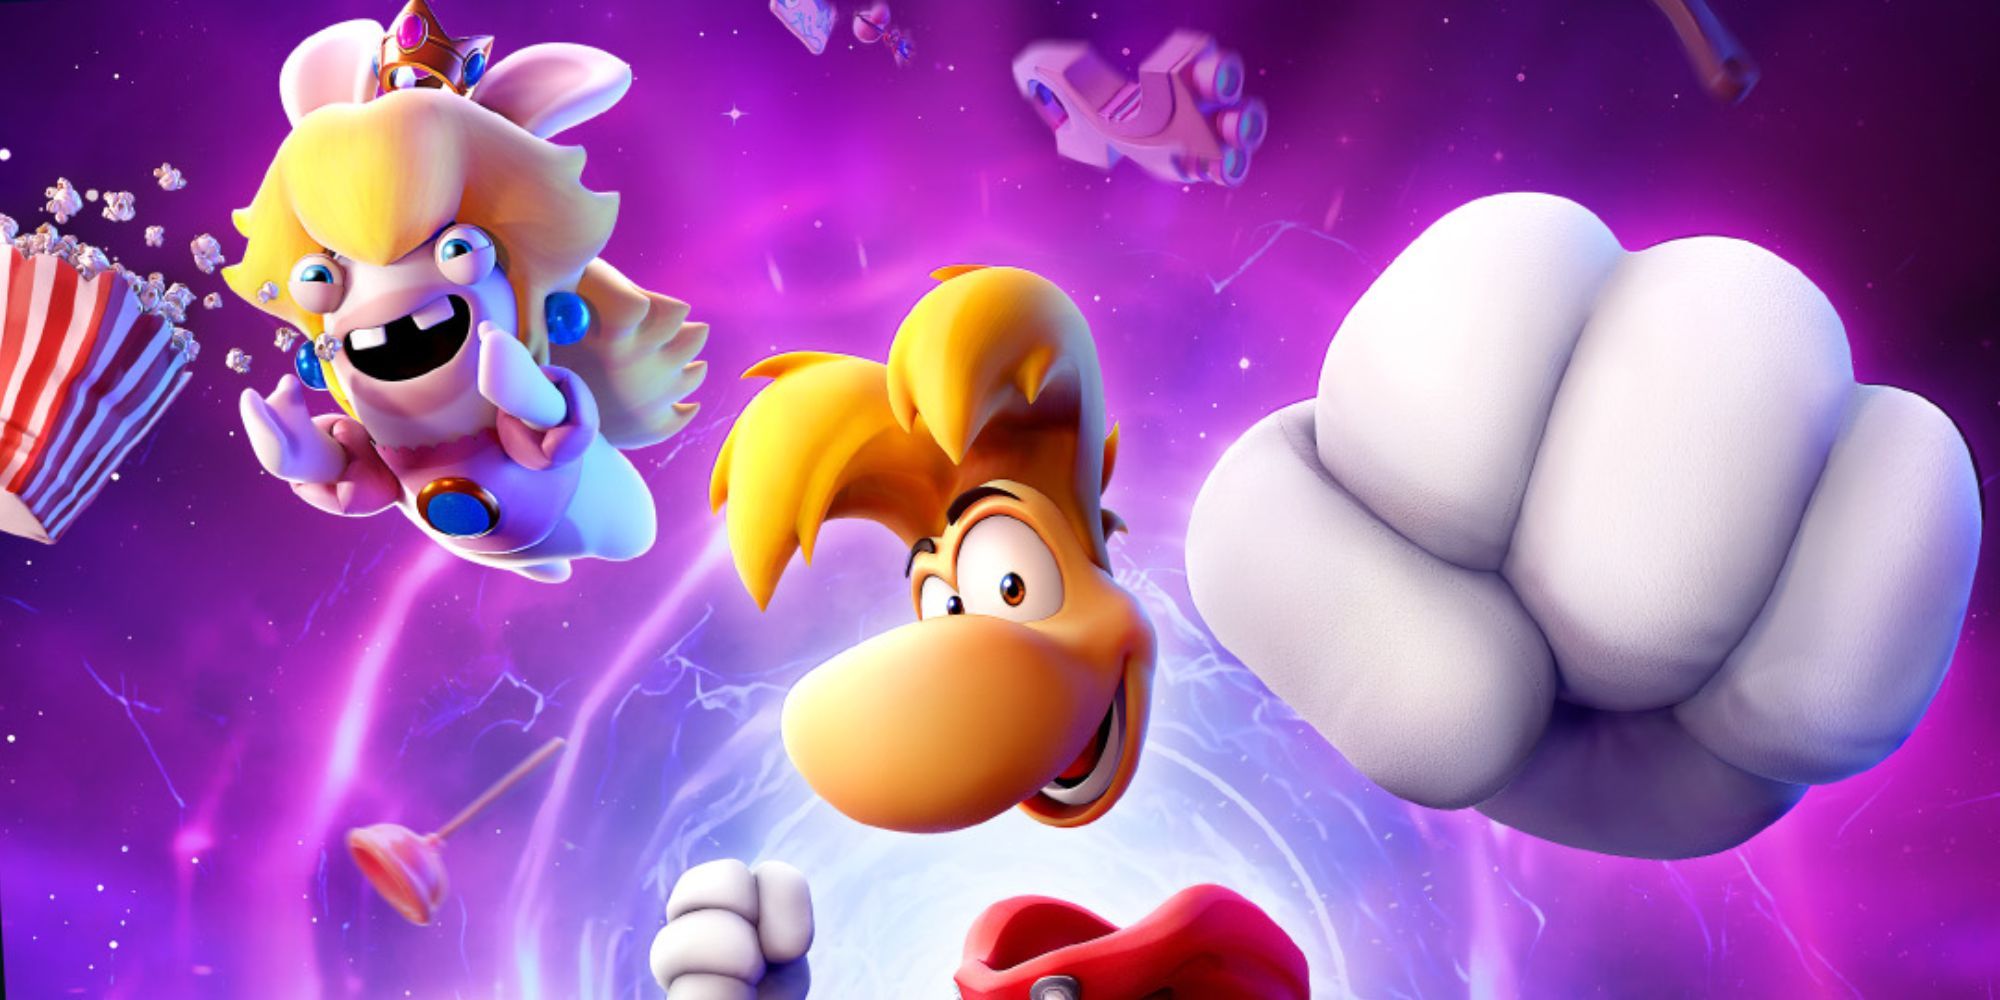 Rayman Fans Think His Sparks Of Hope DLC Might Place In Band Land Or Picture City